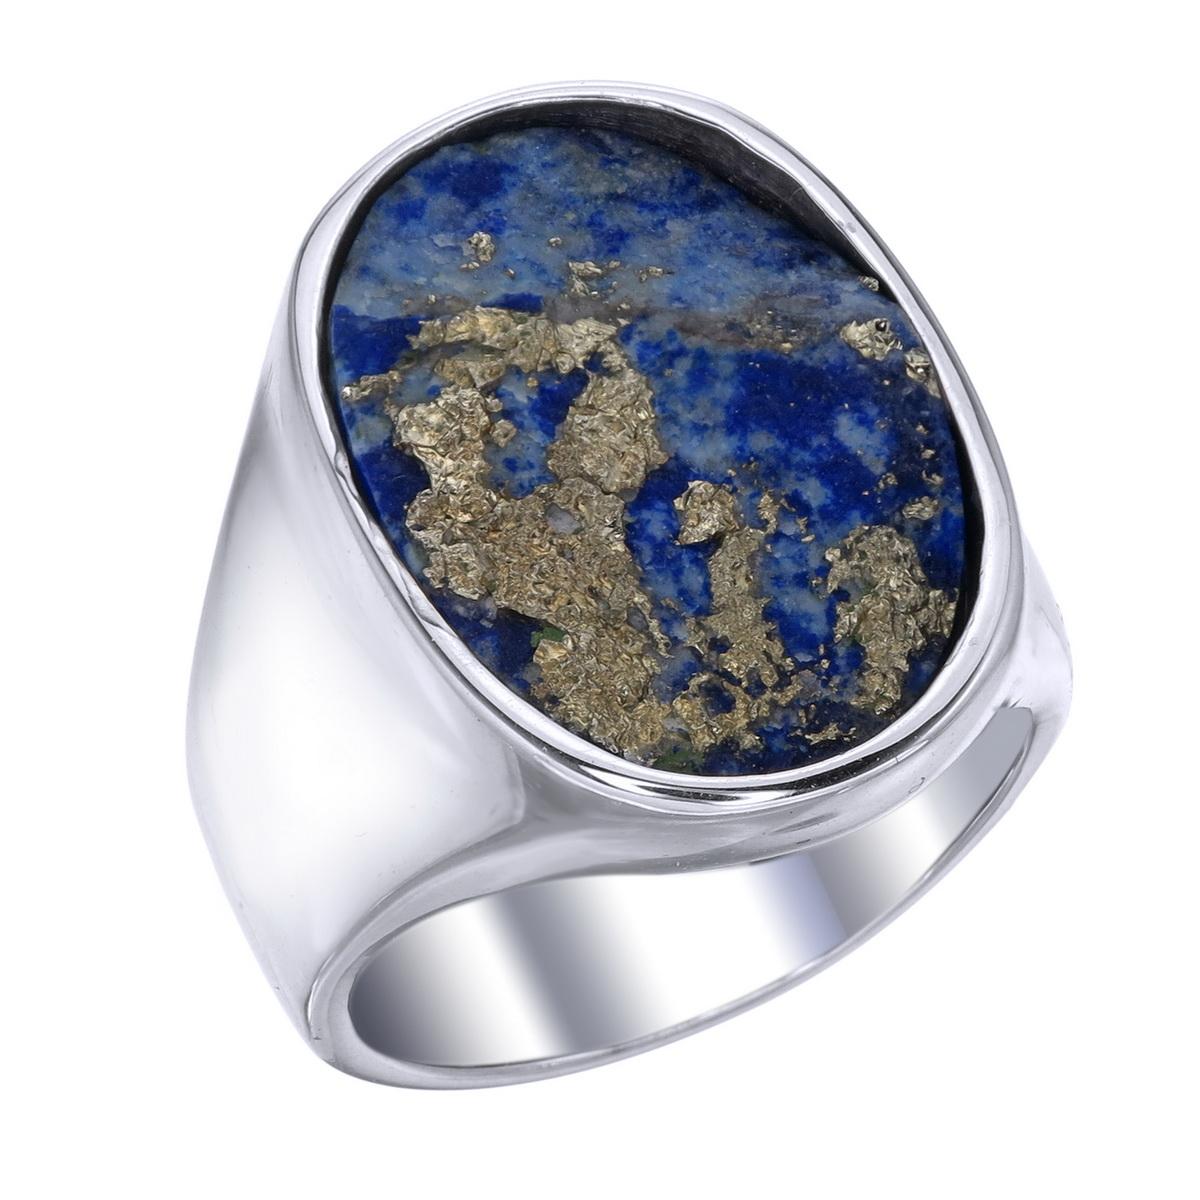 Orloff of Denmark; 8.70 carat Lapis Lazuli Sculpture ring fashioned out of 925 Sterling Silver.

From our latest collection based solely on the beautiful Lapis Lazuli.
This piece features a lapis lazuli cut in an oval shape with one side polished